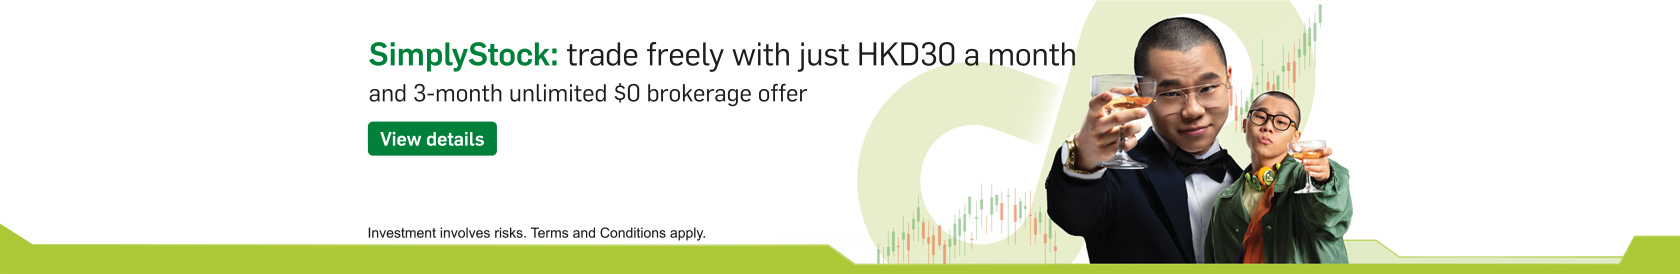 SimplyStock: trade freely with just HKD30 a month and 3-month unlimited $0 brokerage offer. View details. Opens in a new window